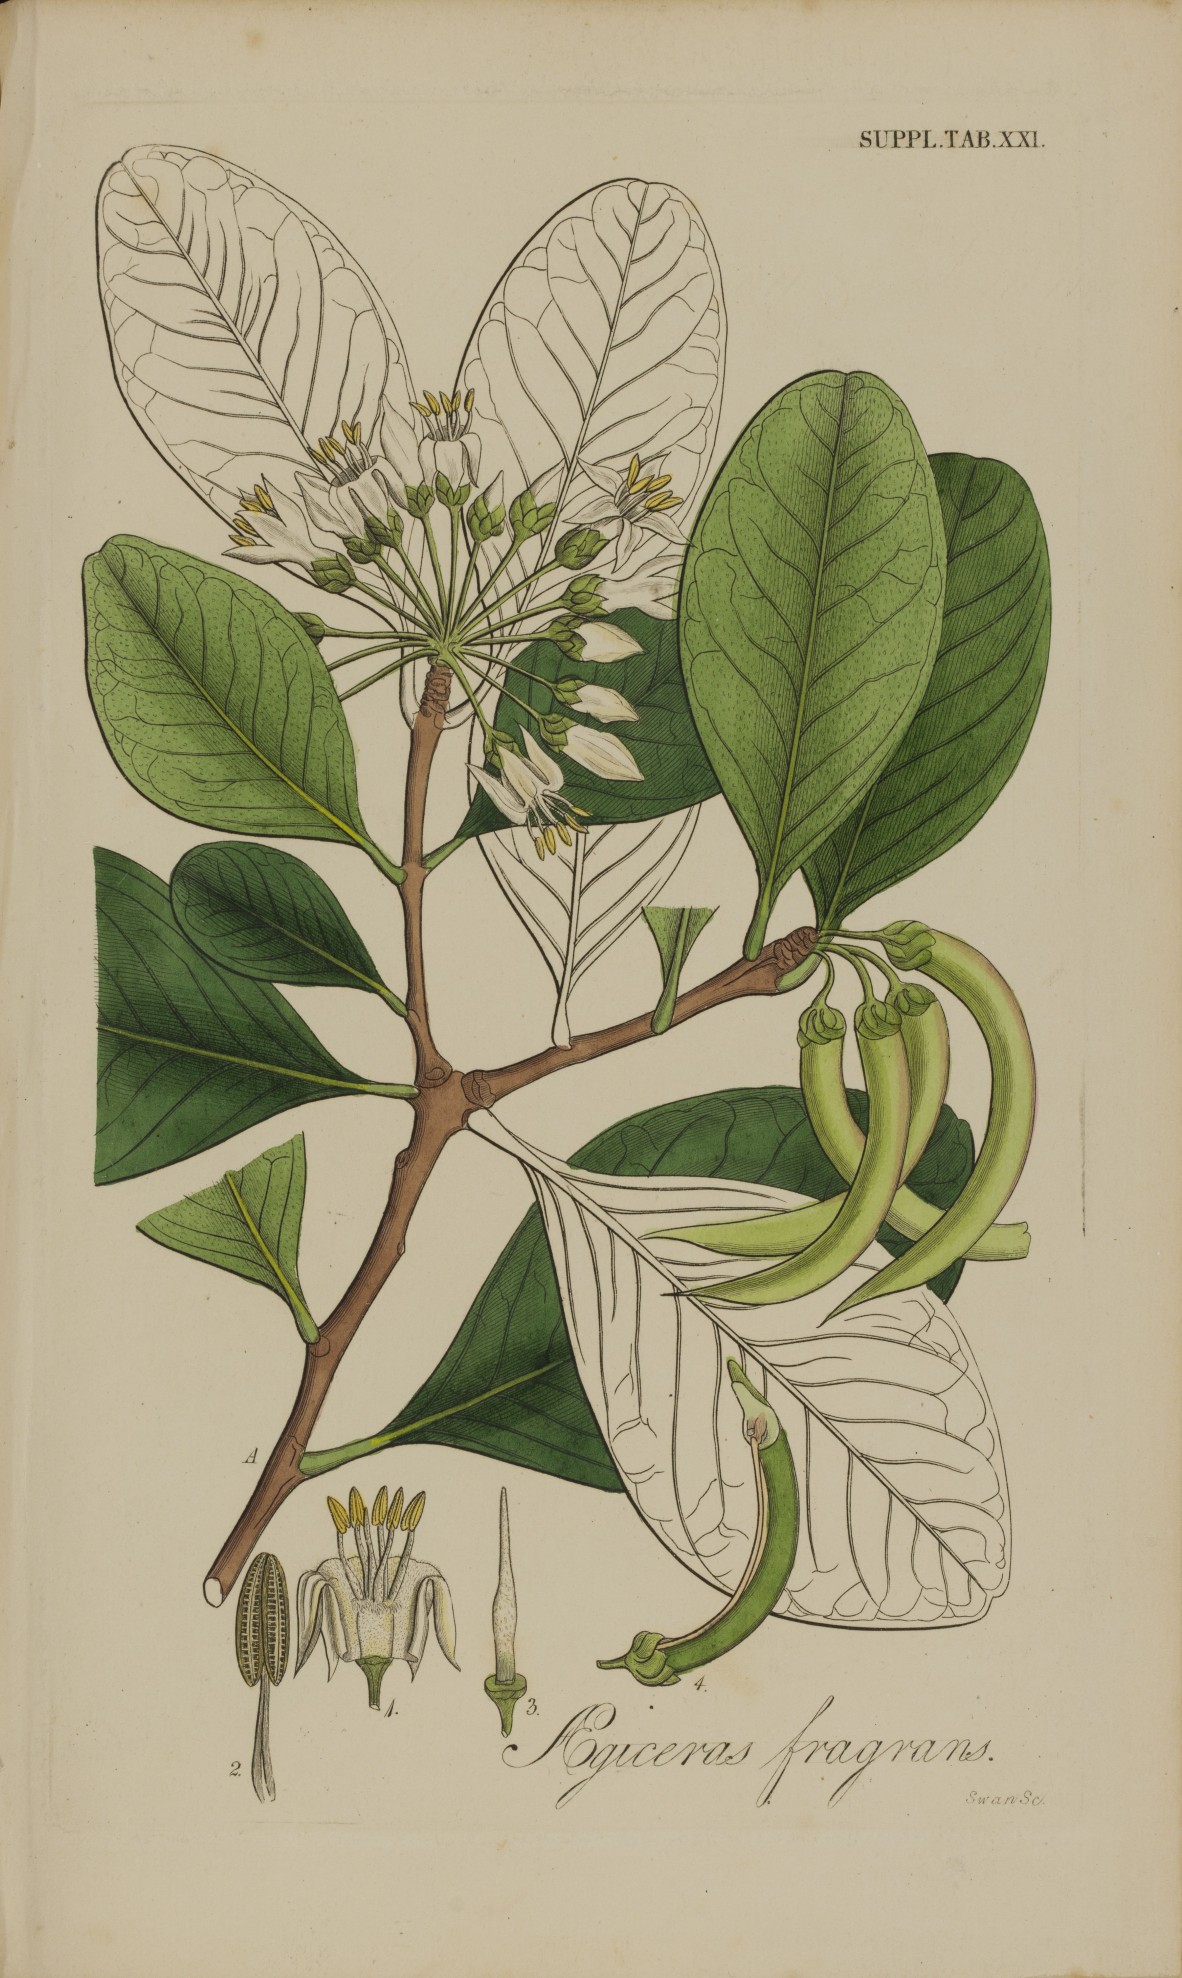 River mangrove from Botanical miscellany vol 5